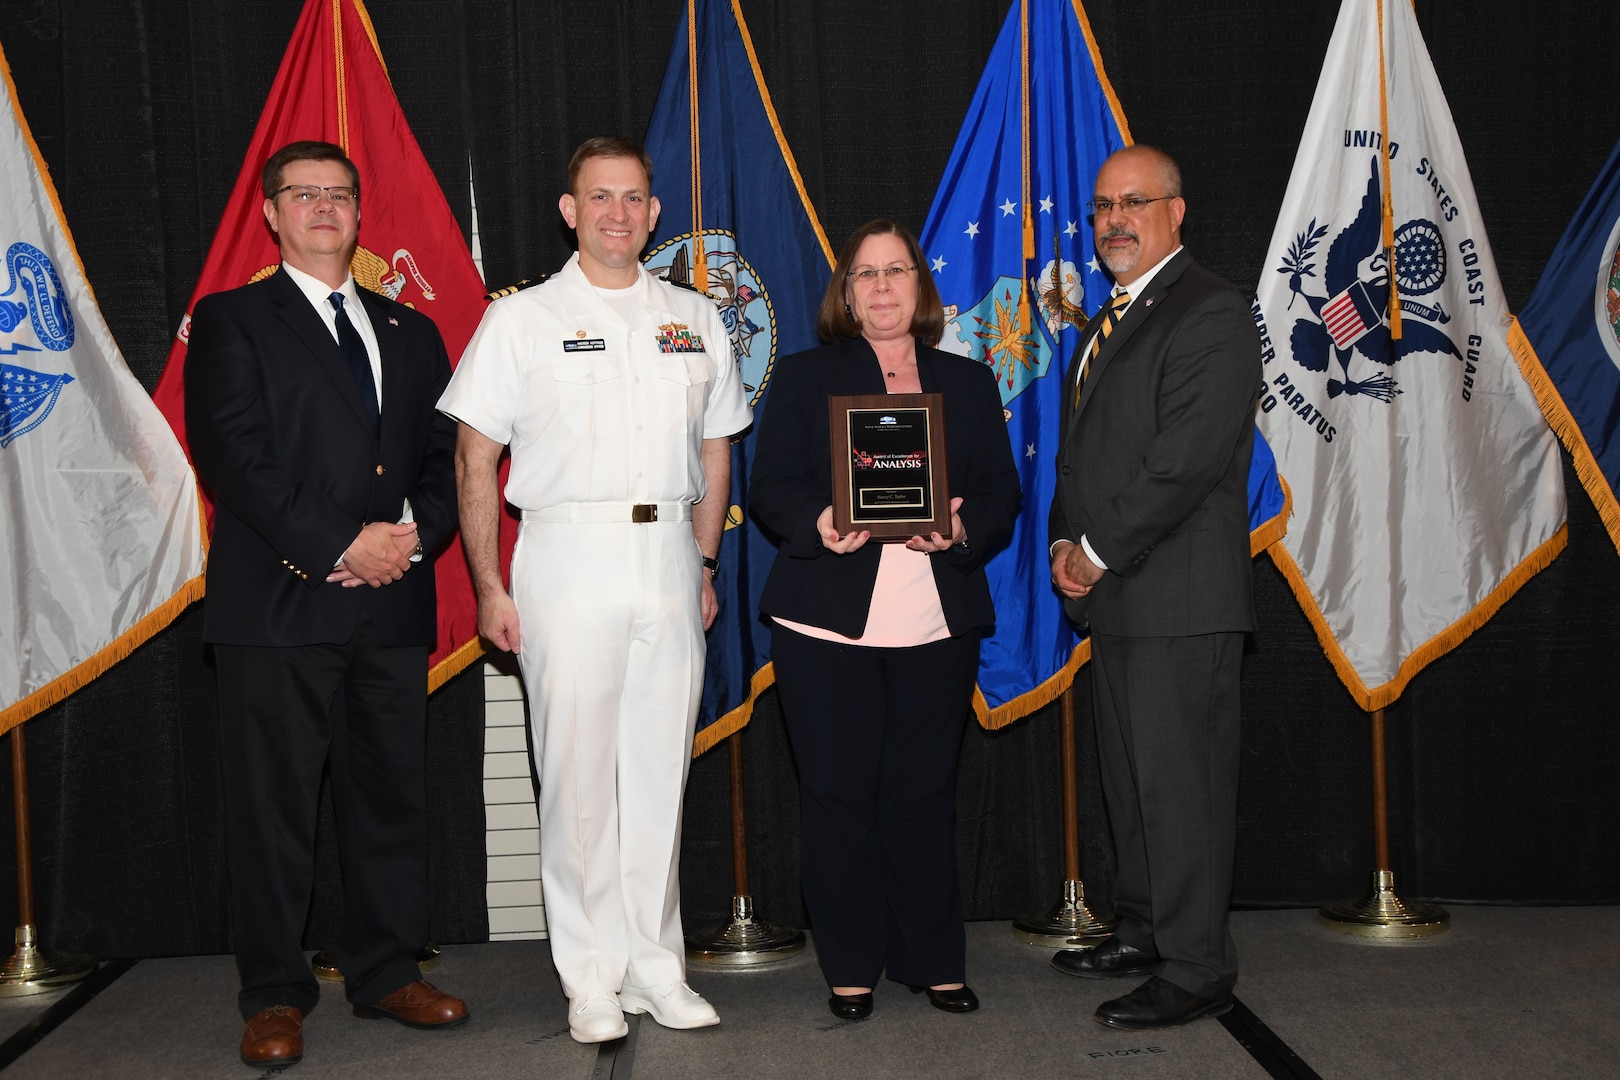 IMAGE: Nancy Taylor is presented the NSWCDD Award of Excellence for Analysis at Naval Surface Warfare Center Dahlgren Division's annual awards ceremony, Apr. 26 at the Fredericksburg Expo and Conference Center.

The NSWCDD Award of Excellence for Analysis is newly established to recognize individuals who have made a notable and significant impact to NSWCDD through their outstanding performance in analysis - warfare, design, engineering, modeling and simulation.